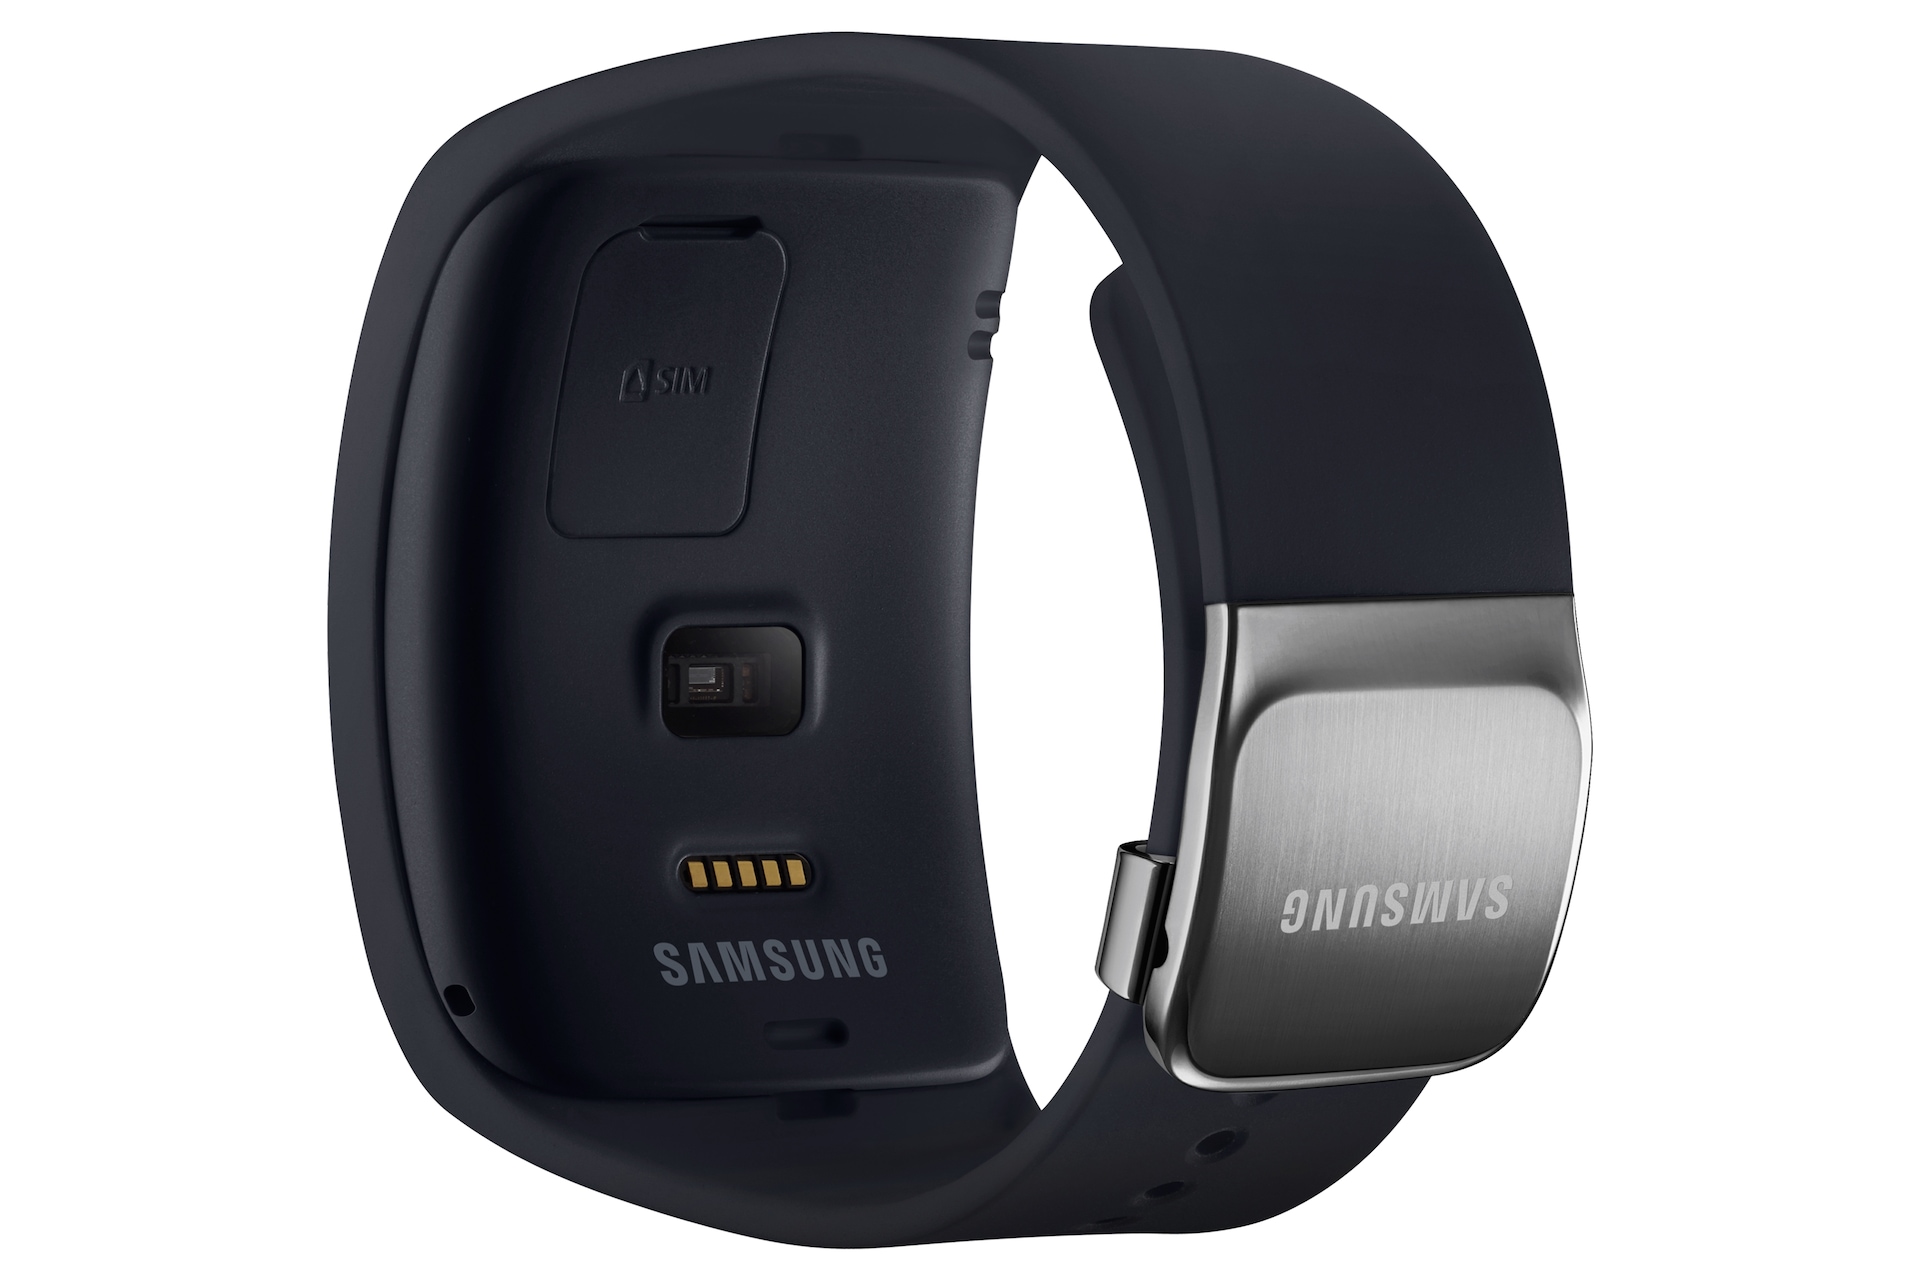 gear s price